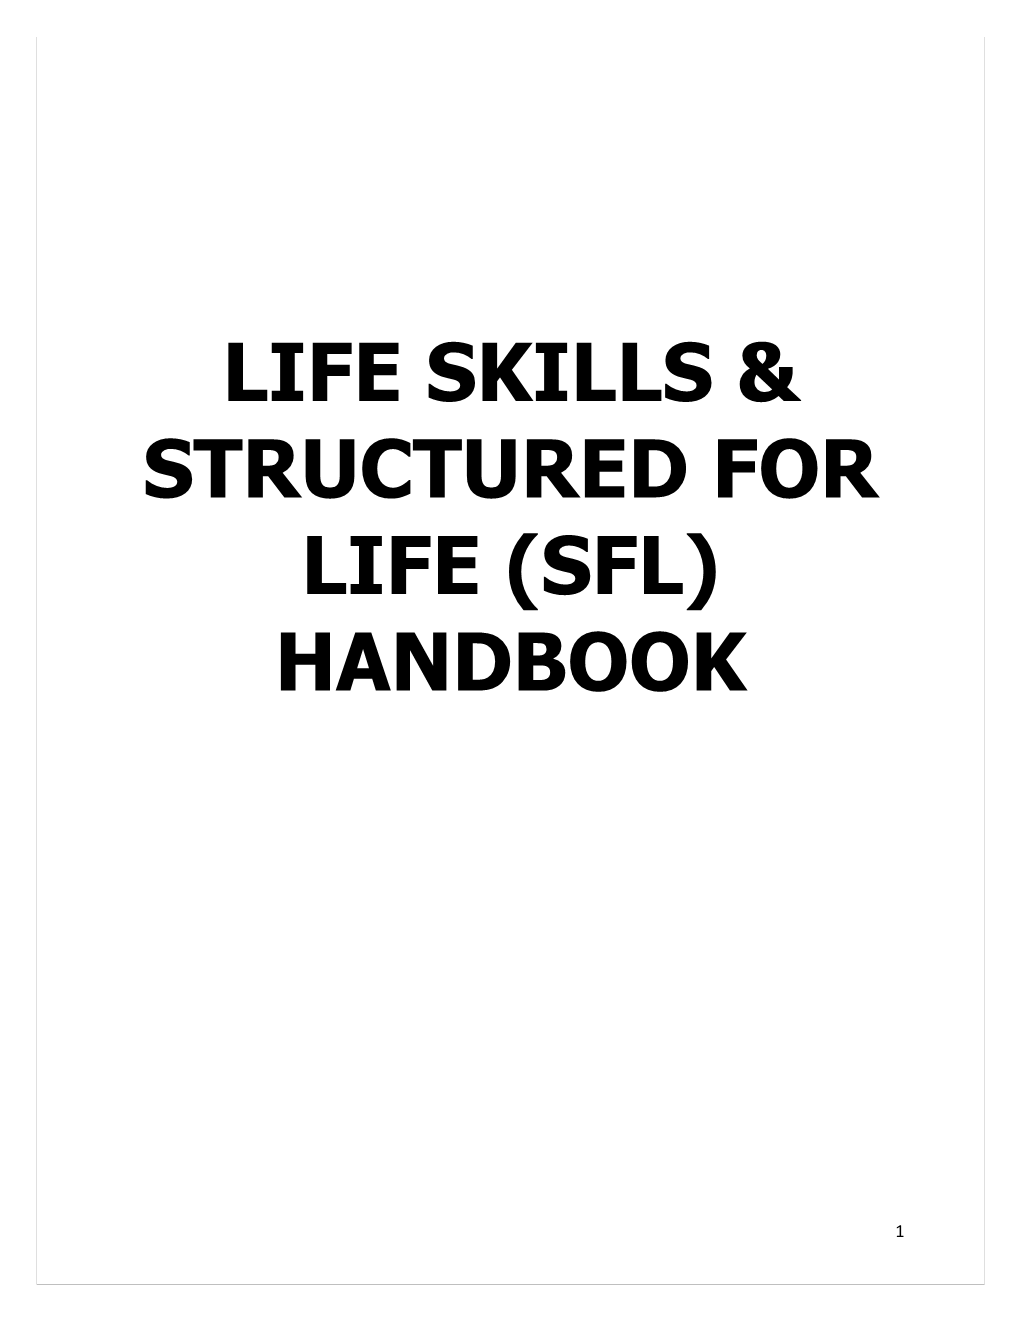 Structured for Life (Sfl)